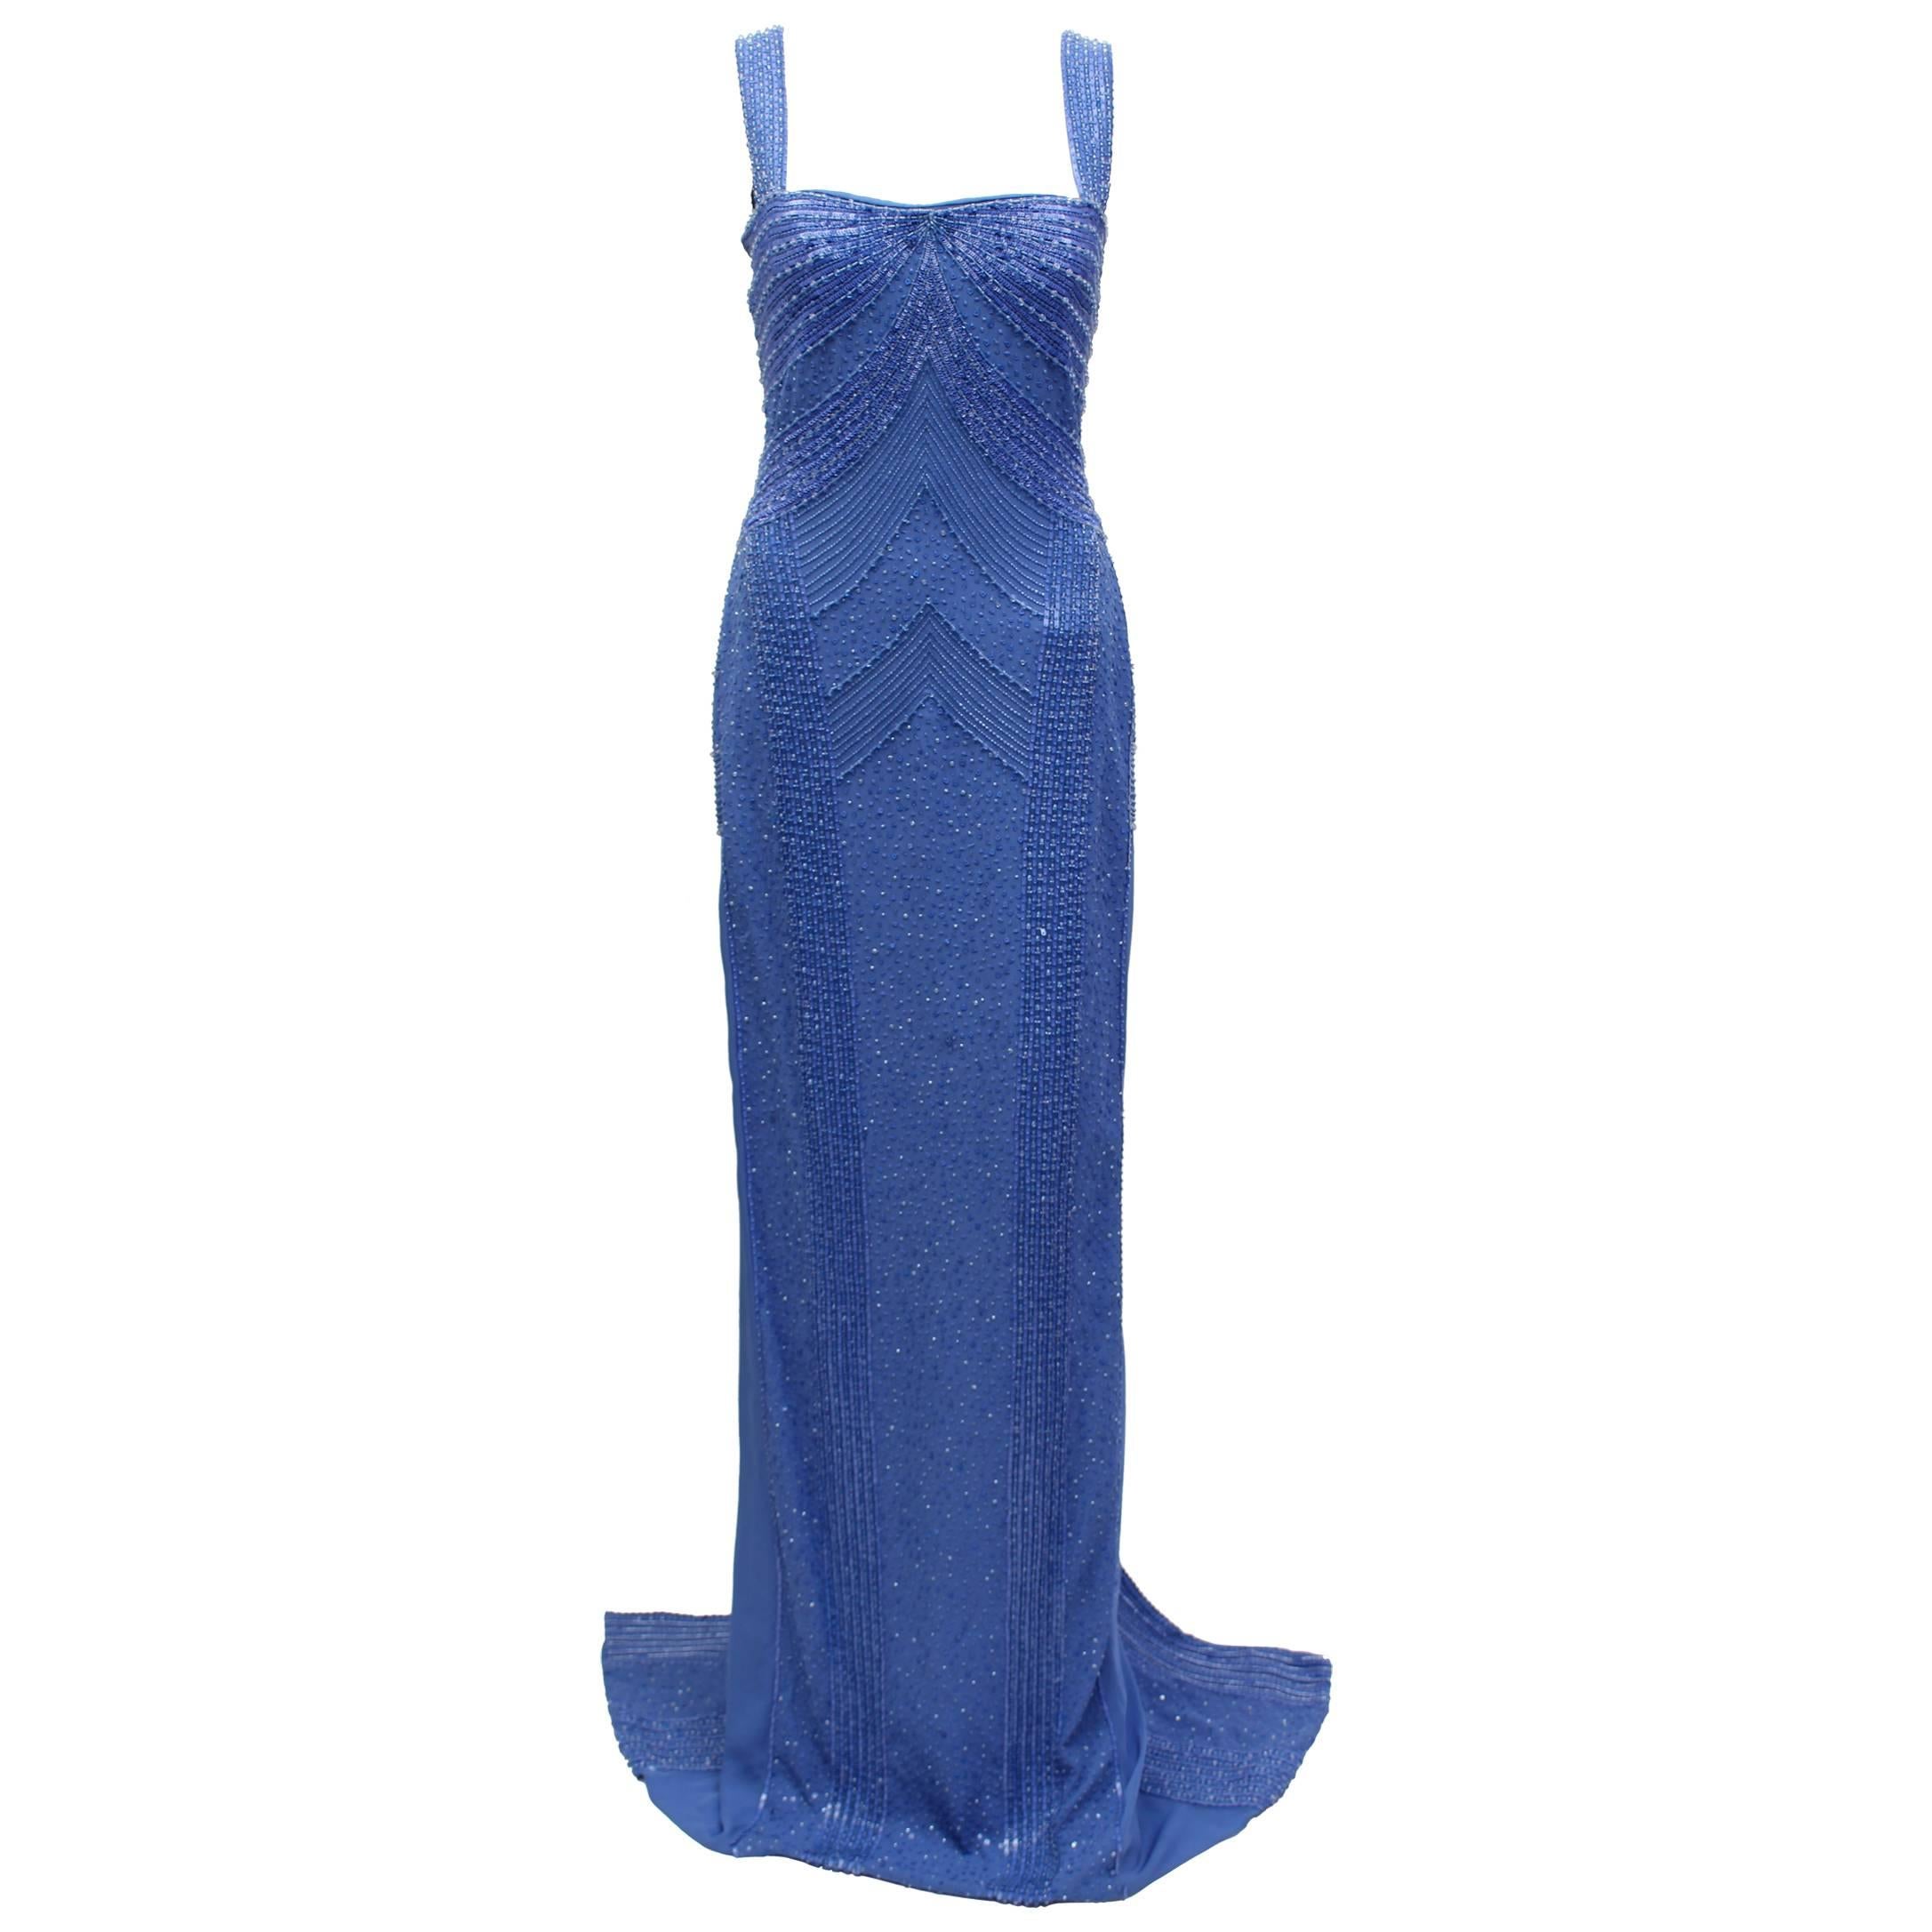 New Versace embellished blue gown